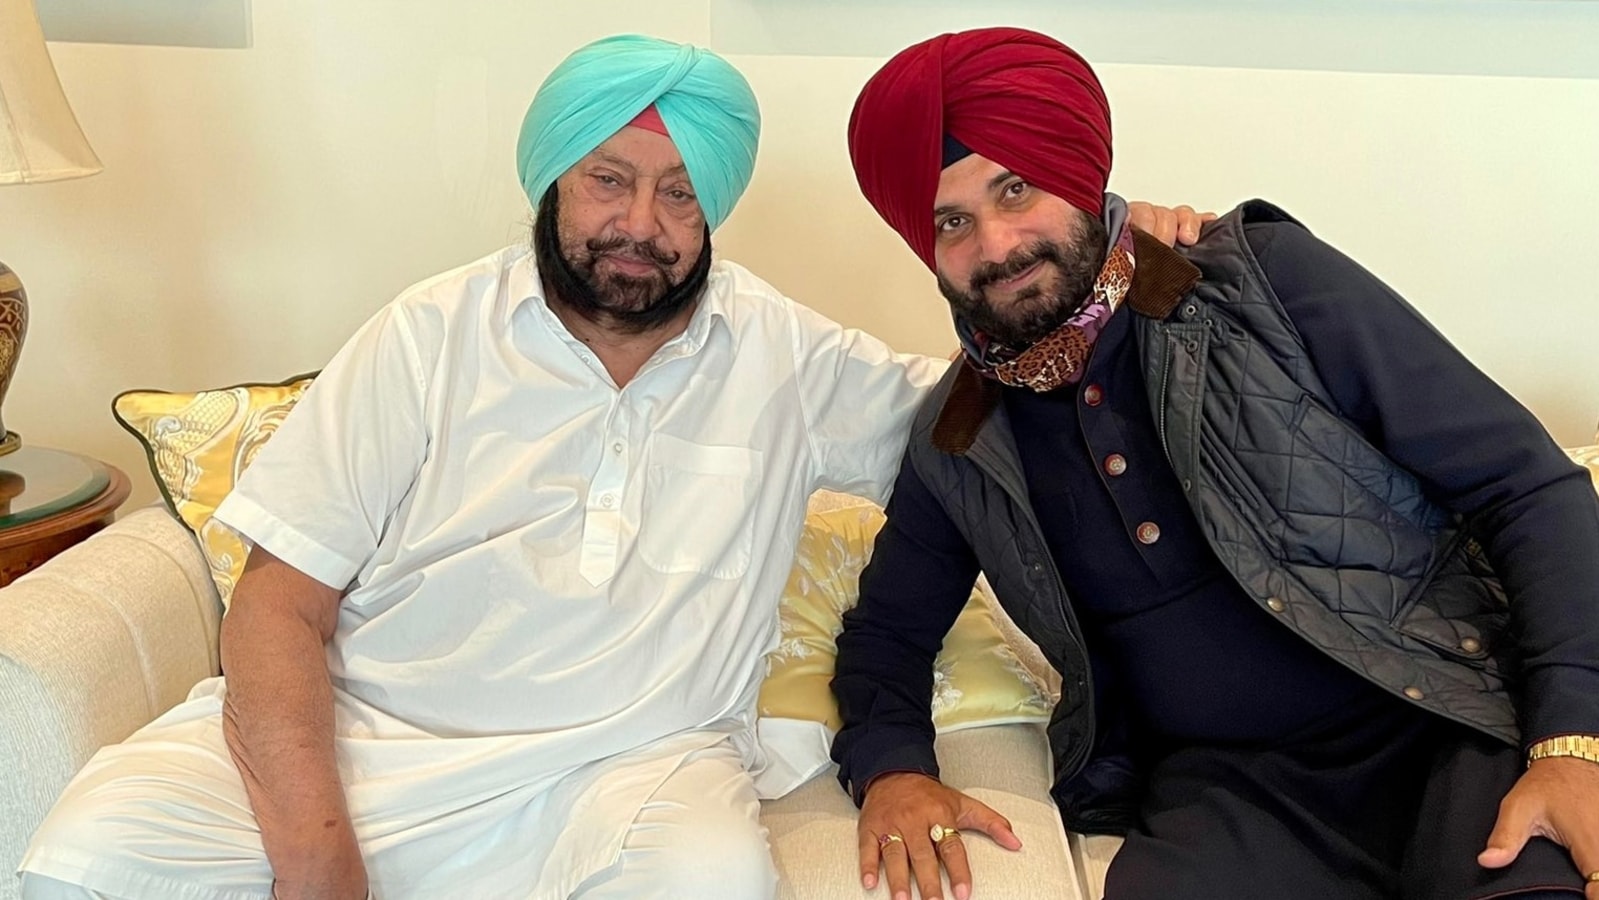 Amarinder won't meet Sidhu until he publicly apologises for personal attacks' | Latest News India - Hindustan Times